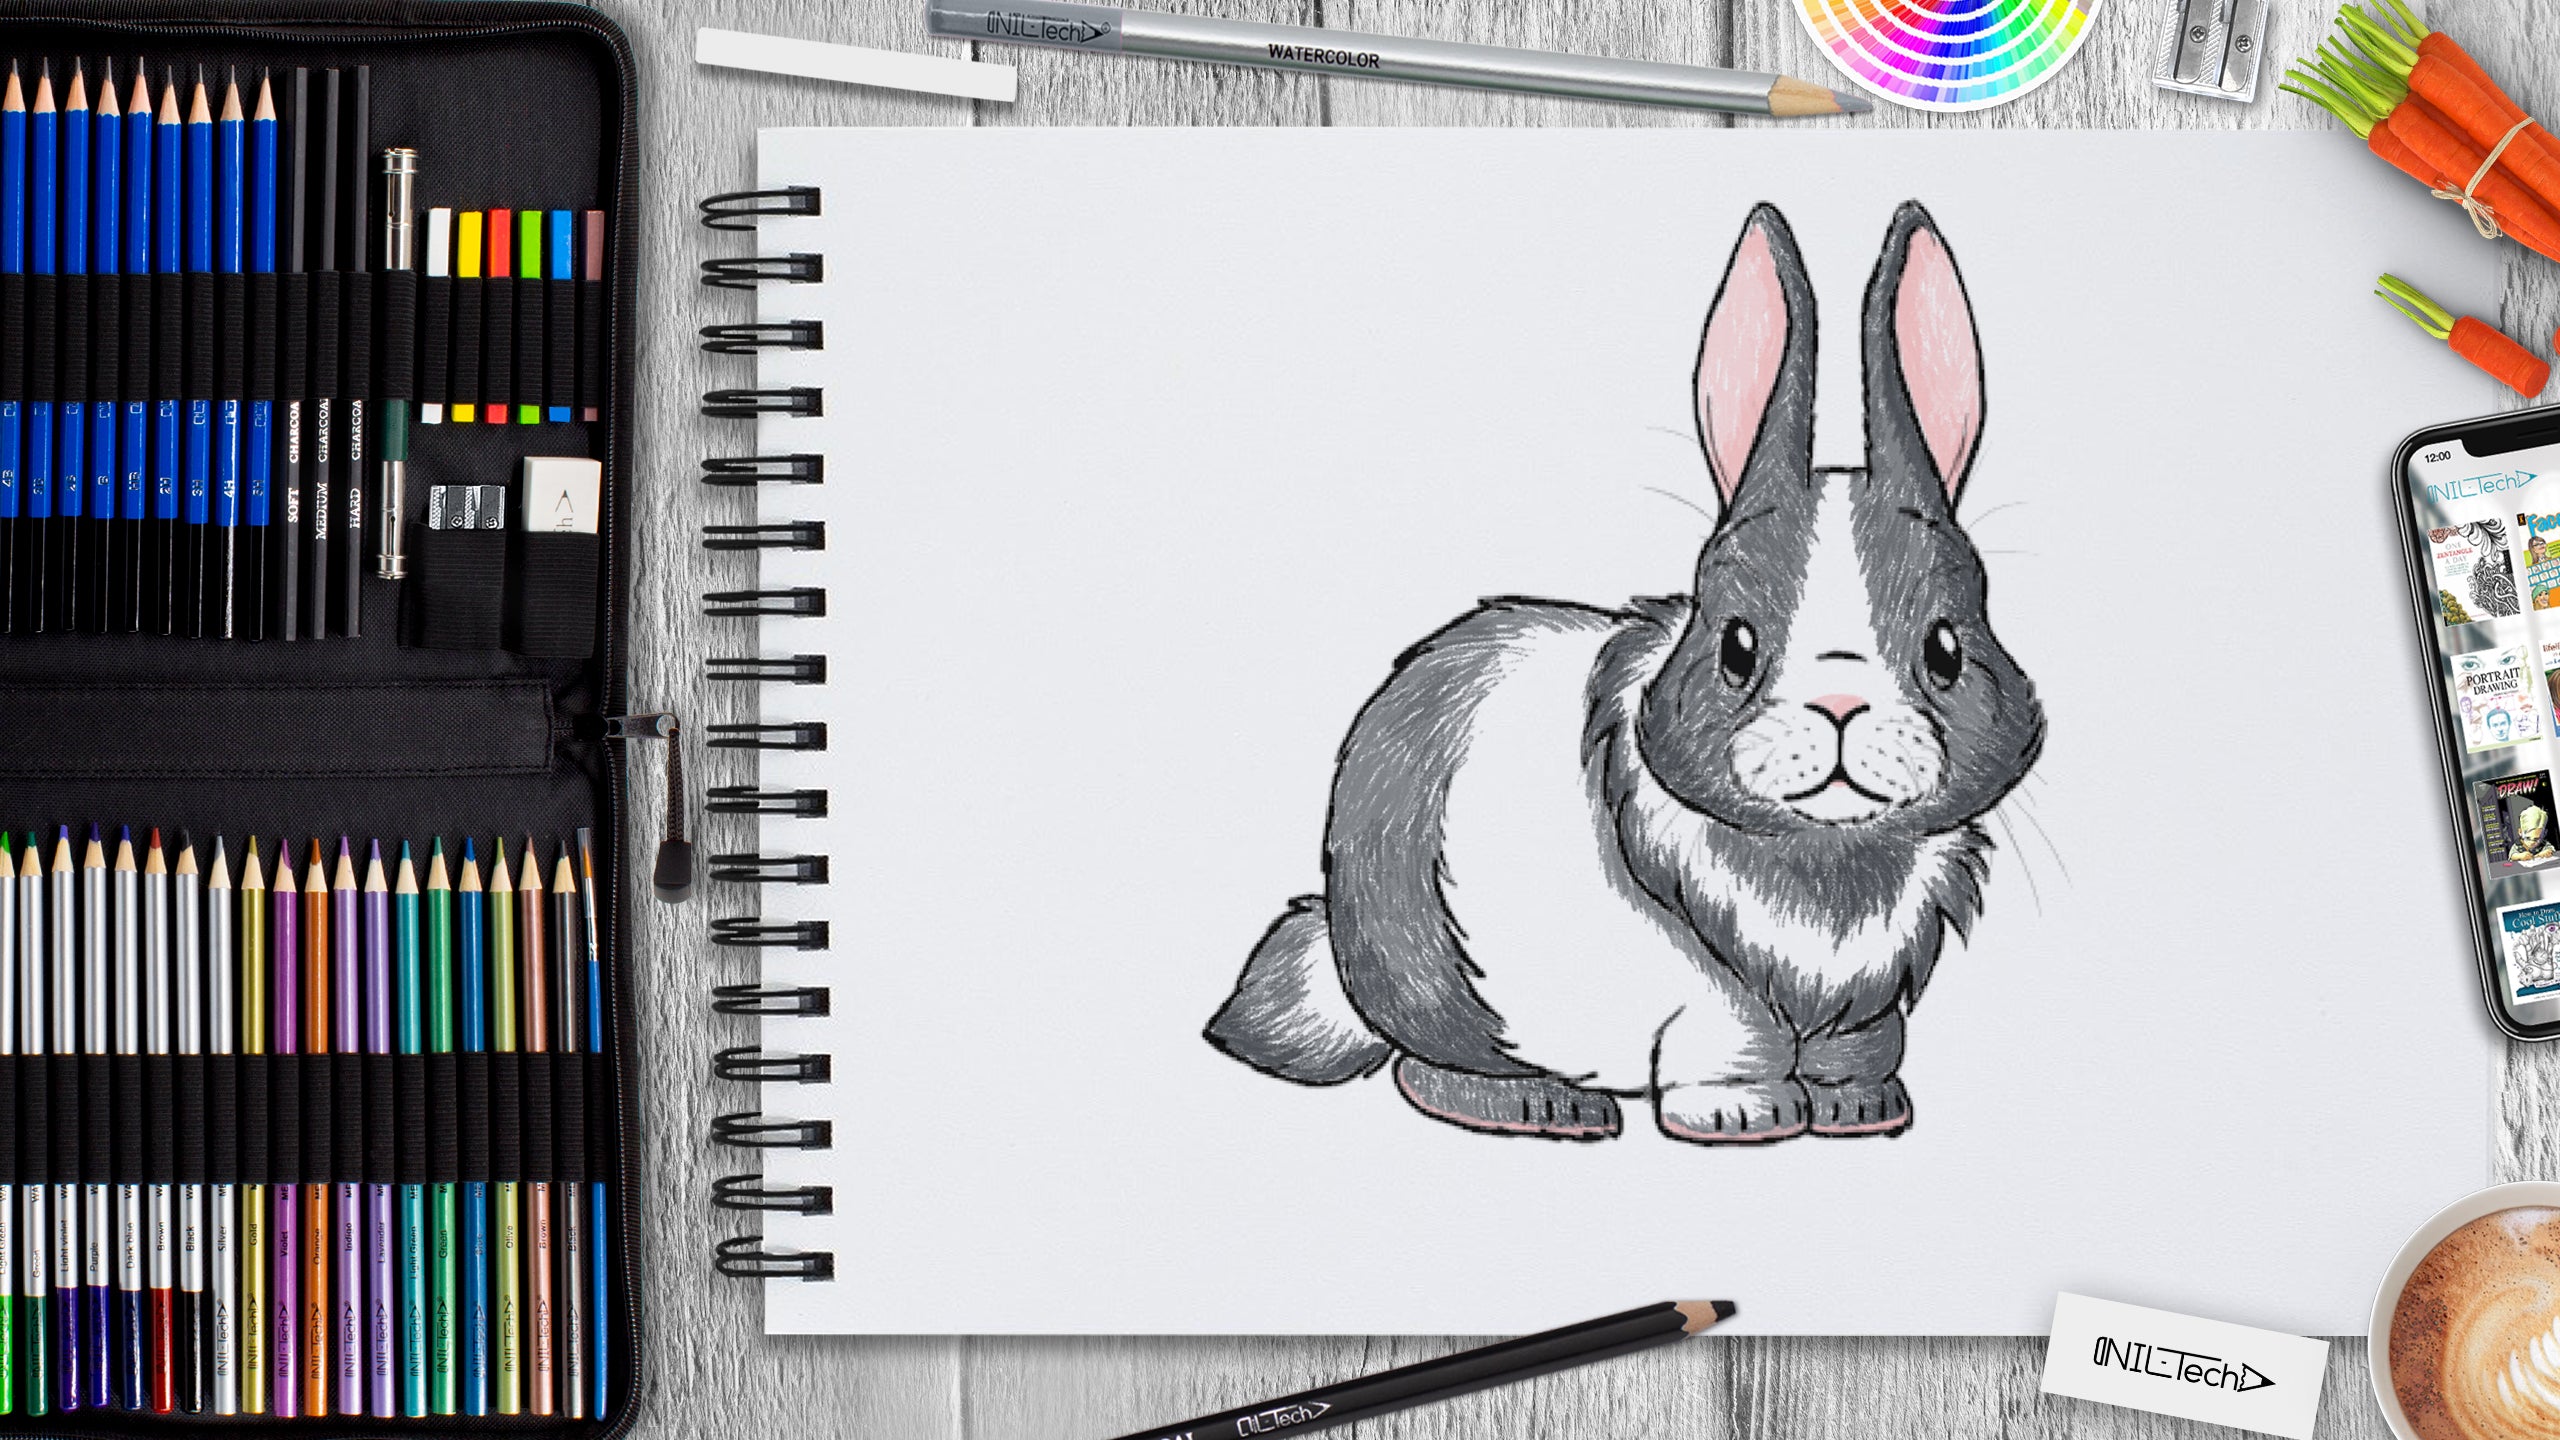 How to draw a rabbit bunny face easy step by step | Drawing for kids -  YouTube | Rabbit drawing, Bunny drawing, Easy drawings for kids